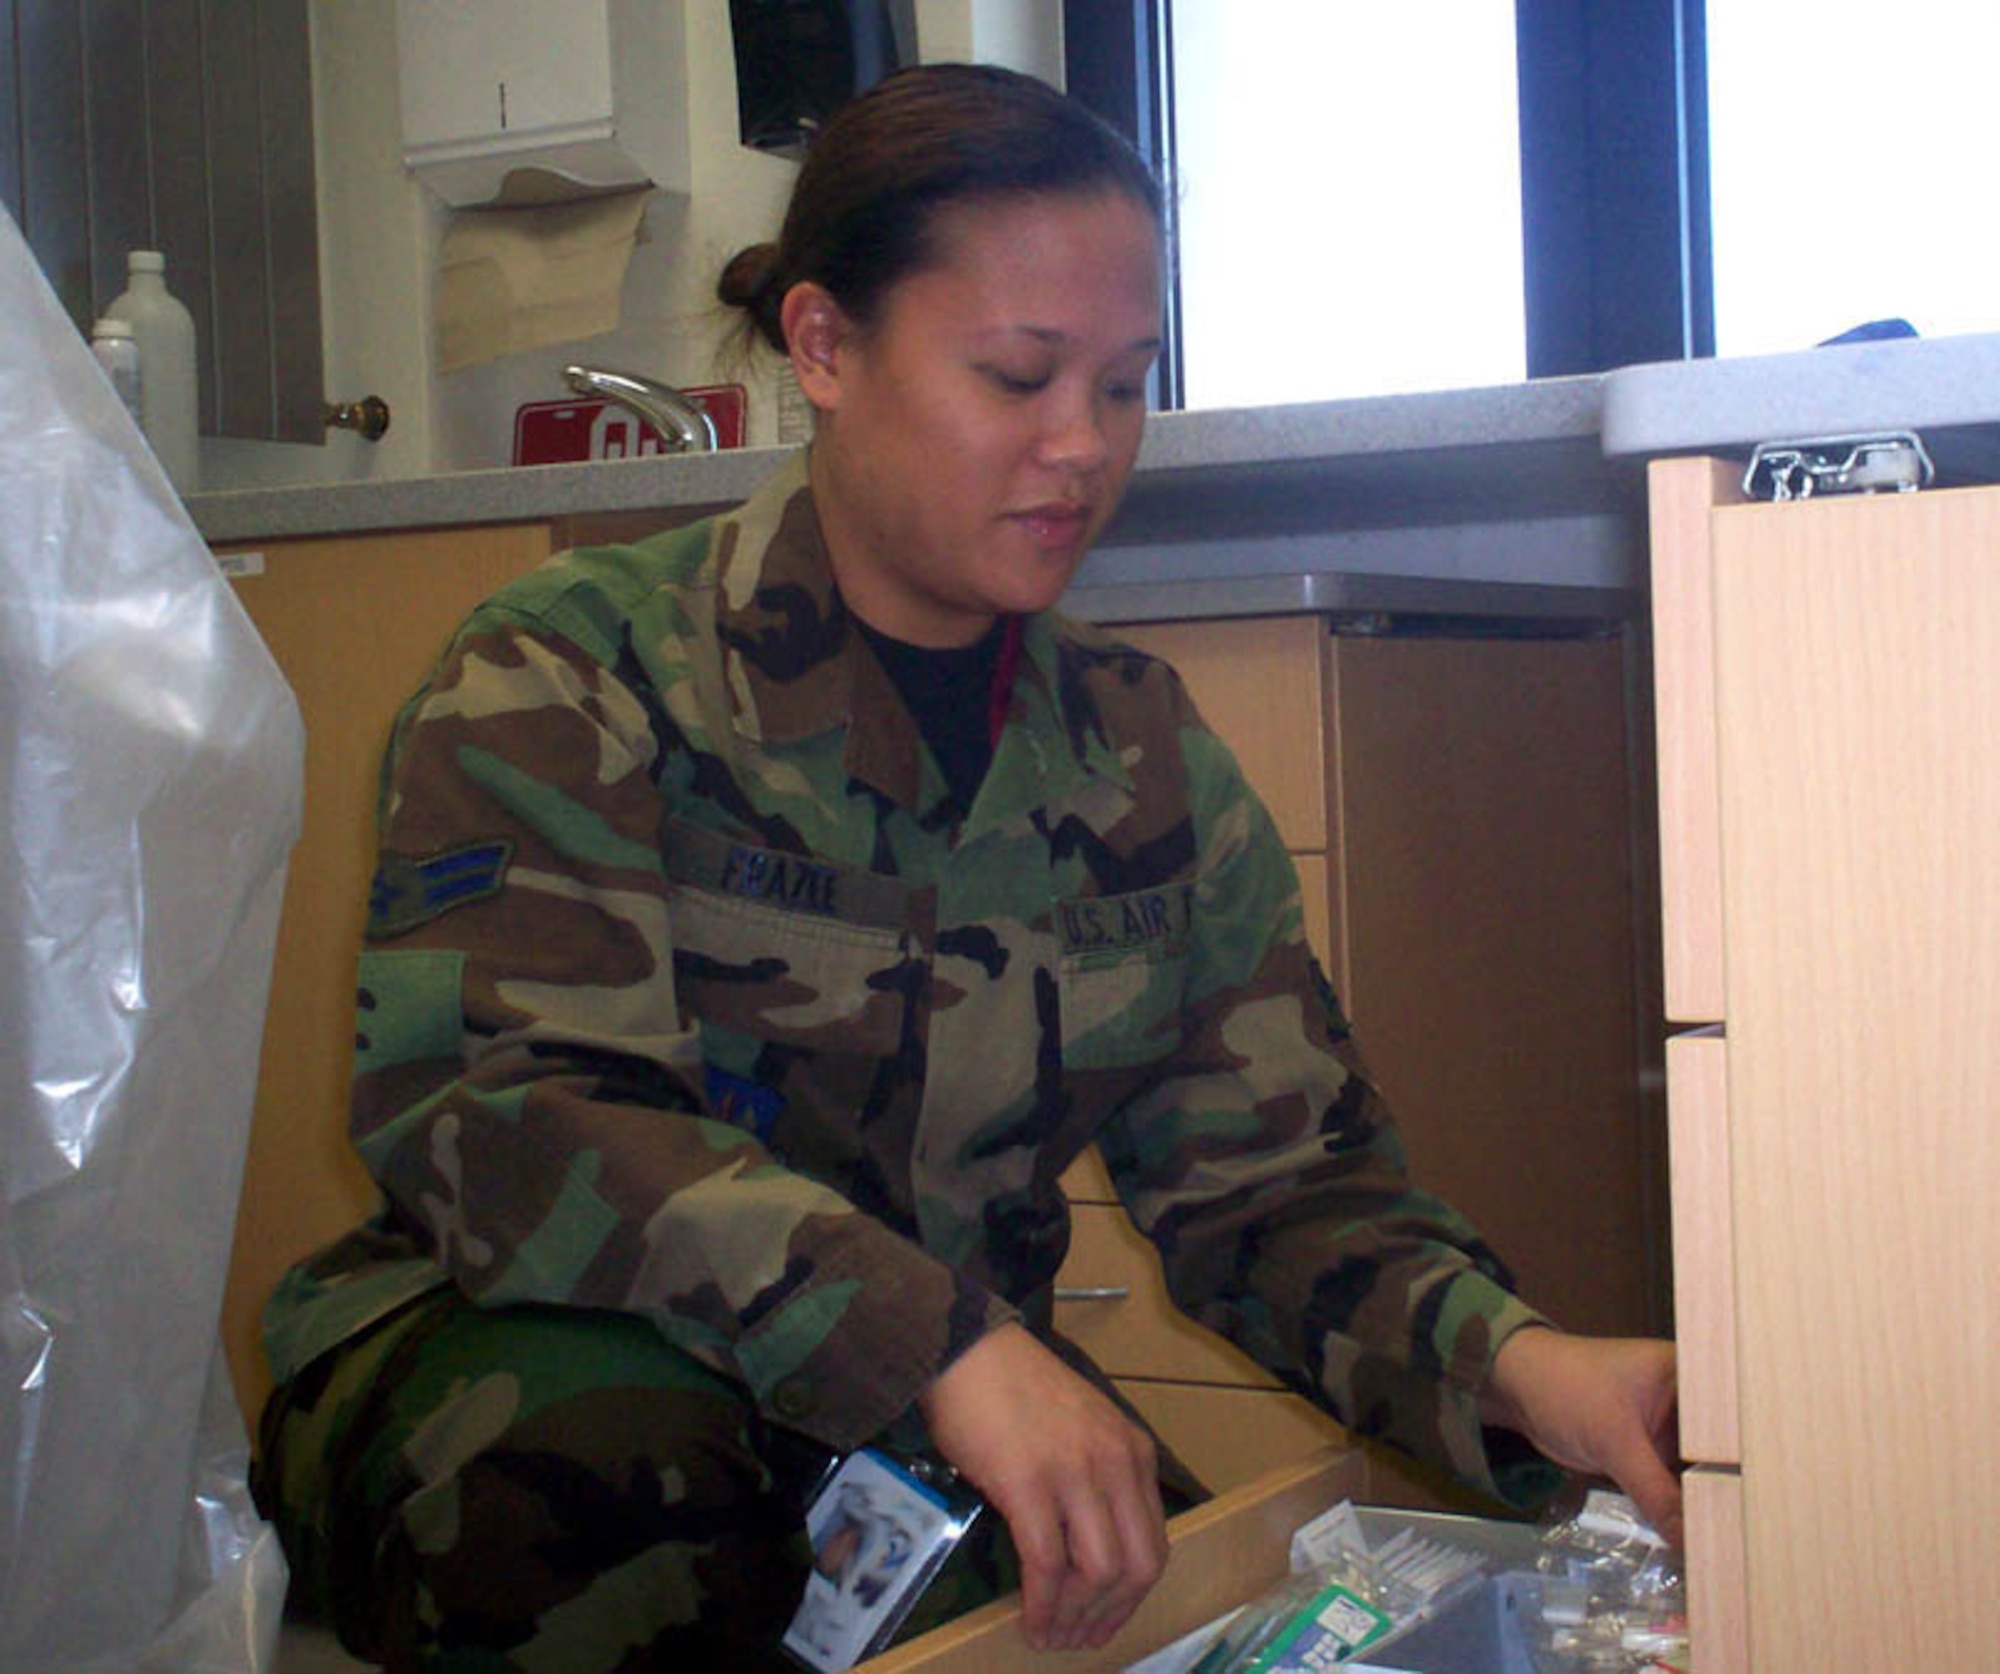 SPANGDAHLEM AIR BASE, GERMANY -- Airman 1st Class Rosalyn Frazee, a 52nd Dental Squadron dental assistant apprentice, has been named the 52nd Fighter Wing's Top Saber Performer for the Week of June 15 - 21, 2007. (U.S. Air Force photo/Staff Sgt. Tammie Moore) 